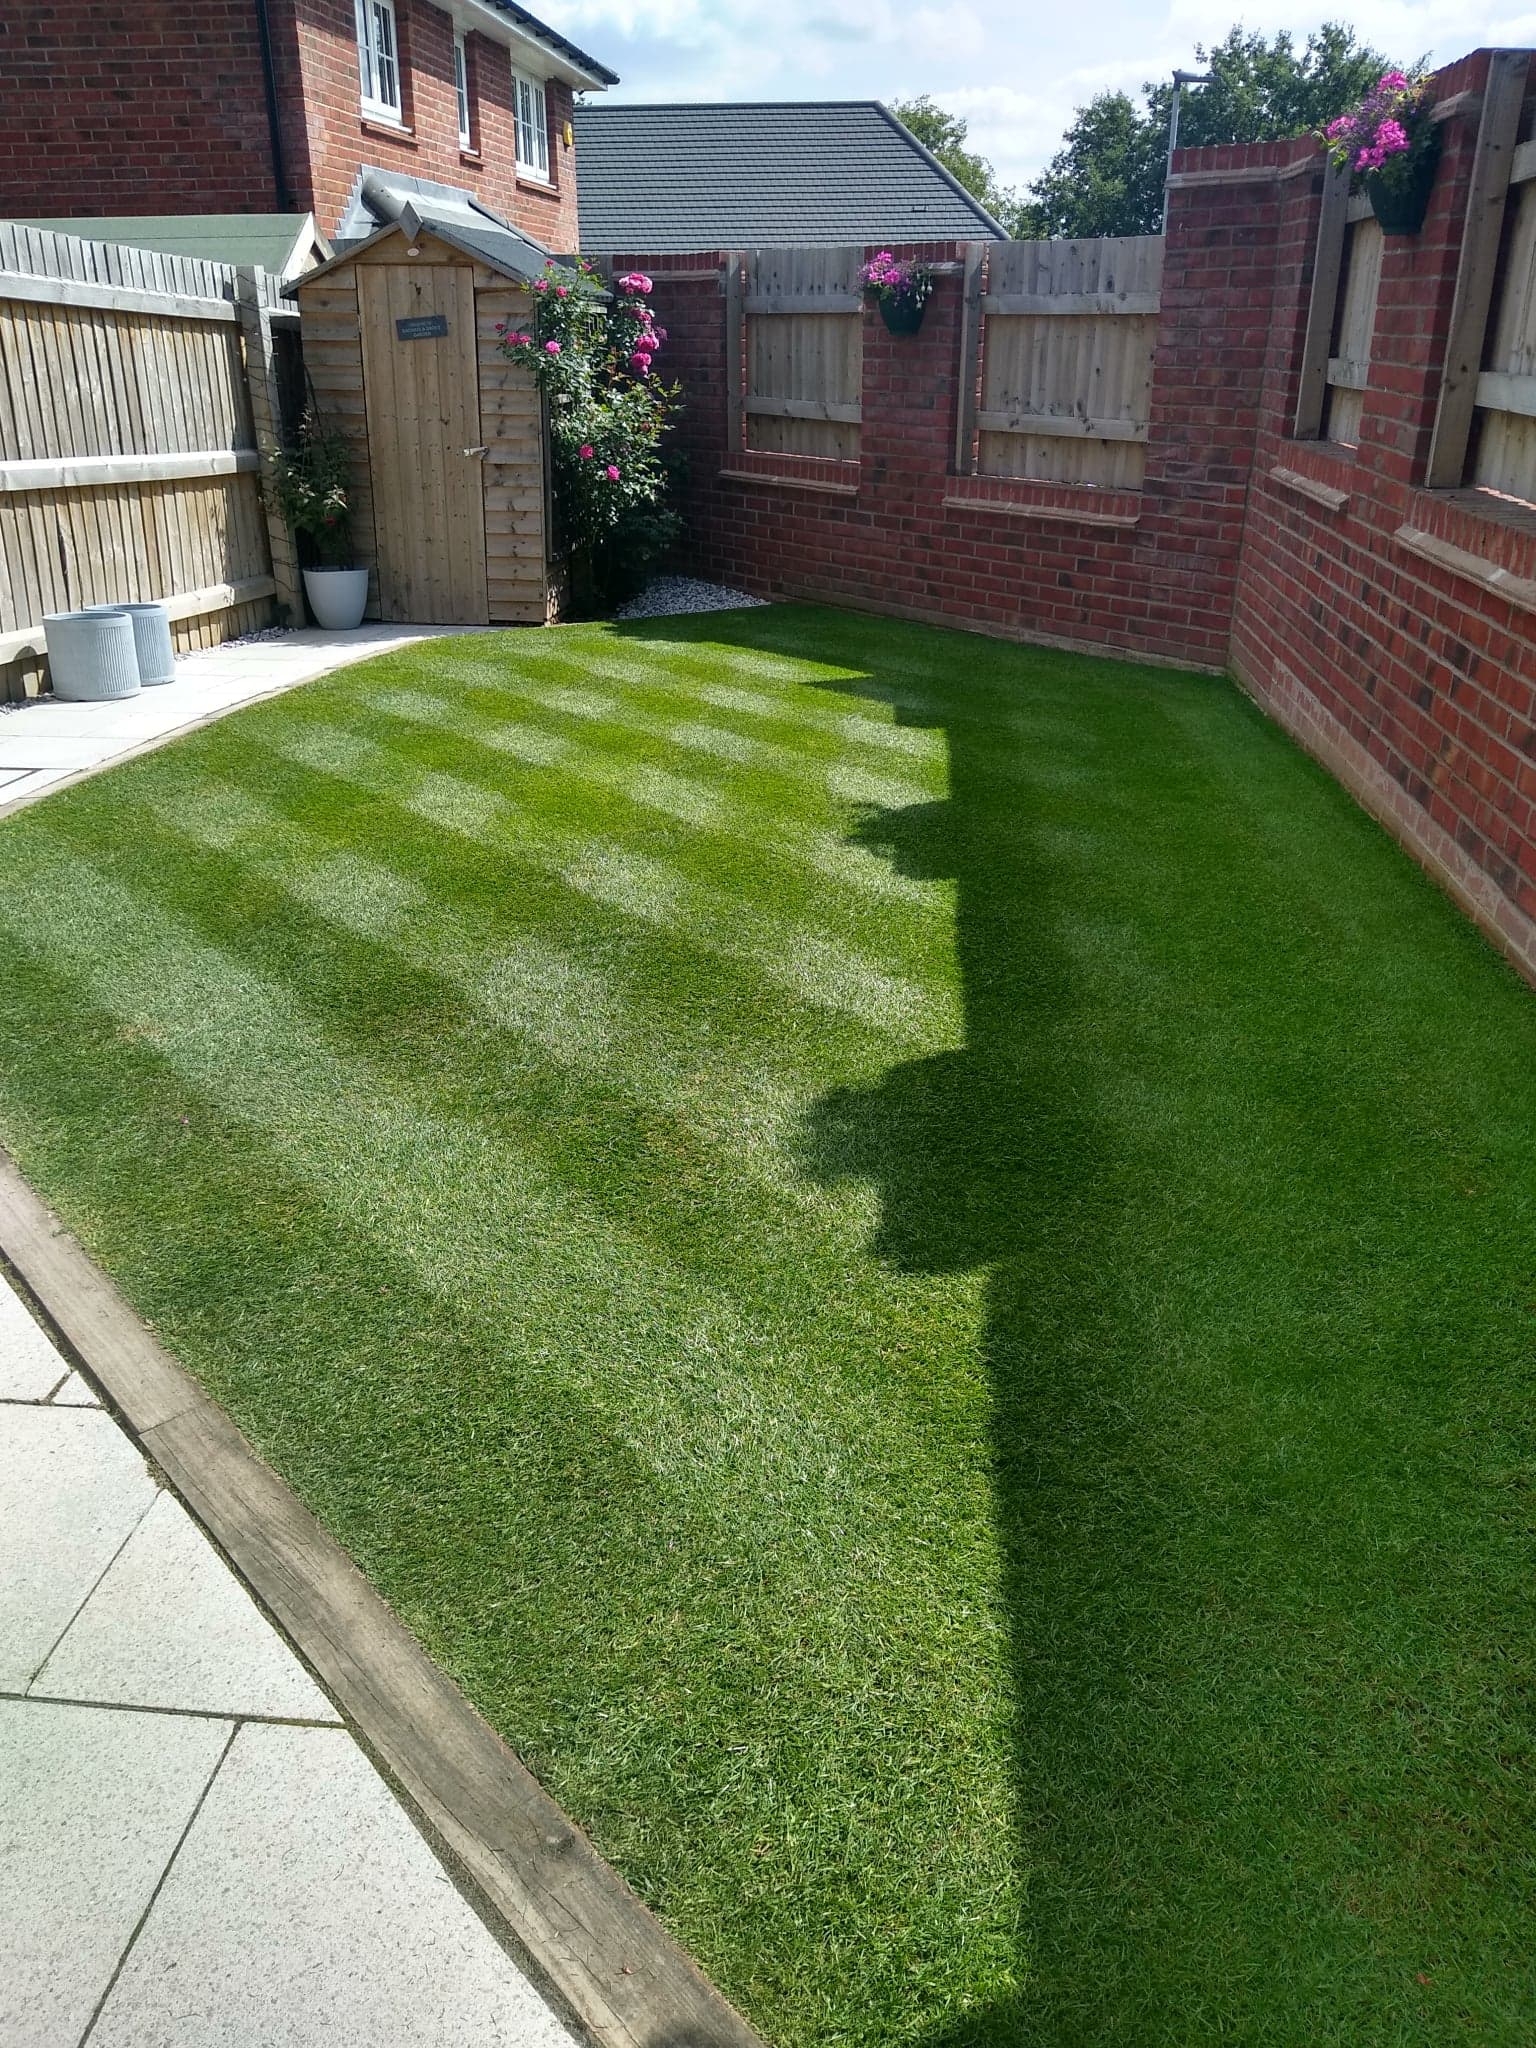 This image is of a small striped lawn in Lichfield which is benefitting from lawn services